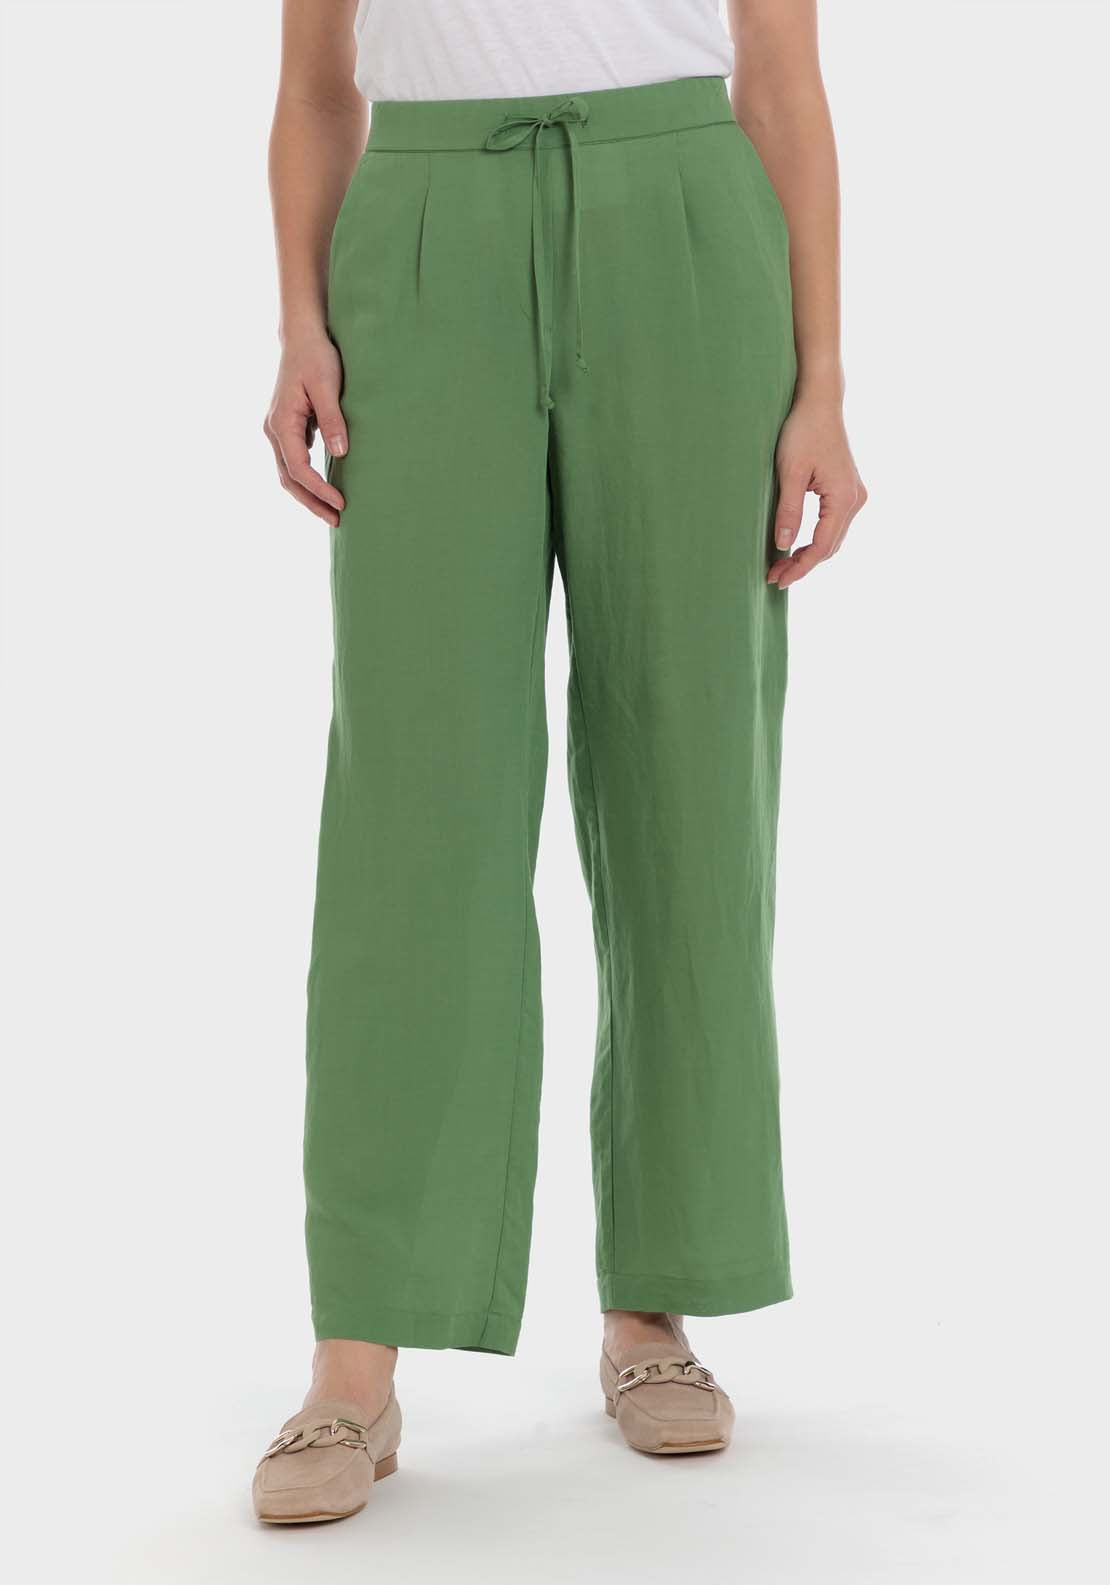 Punt Roma Linen Trousers - Green 2 Shaws Department Stores